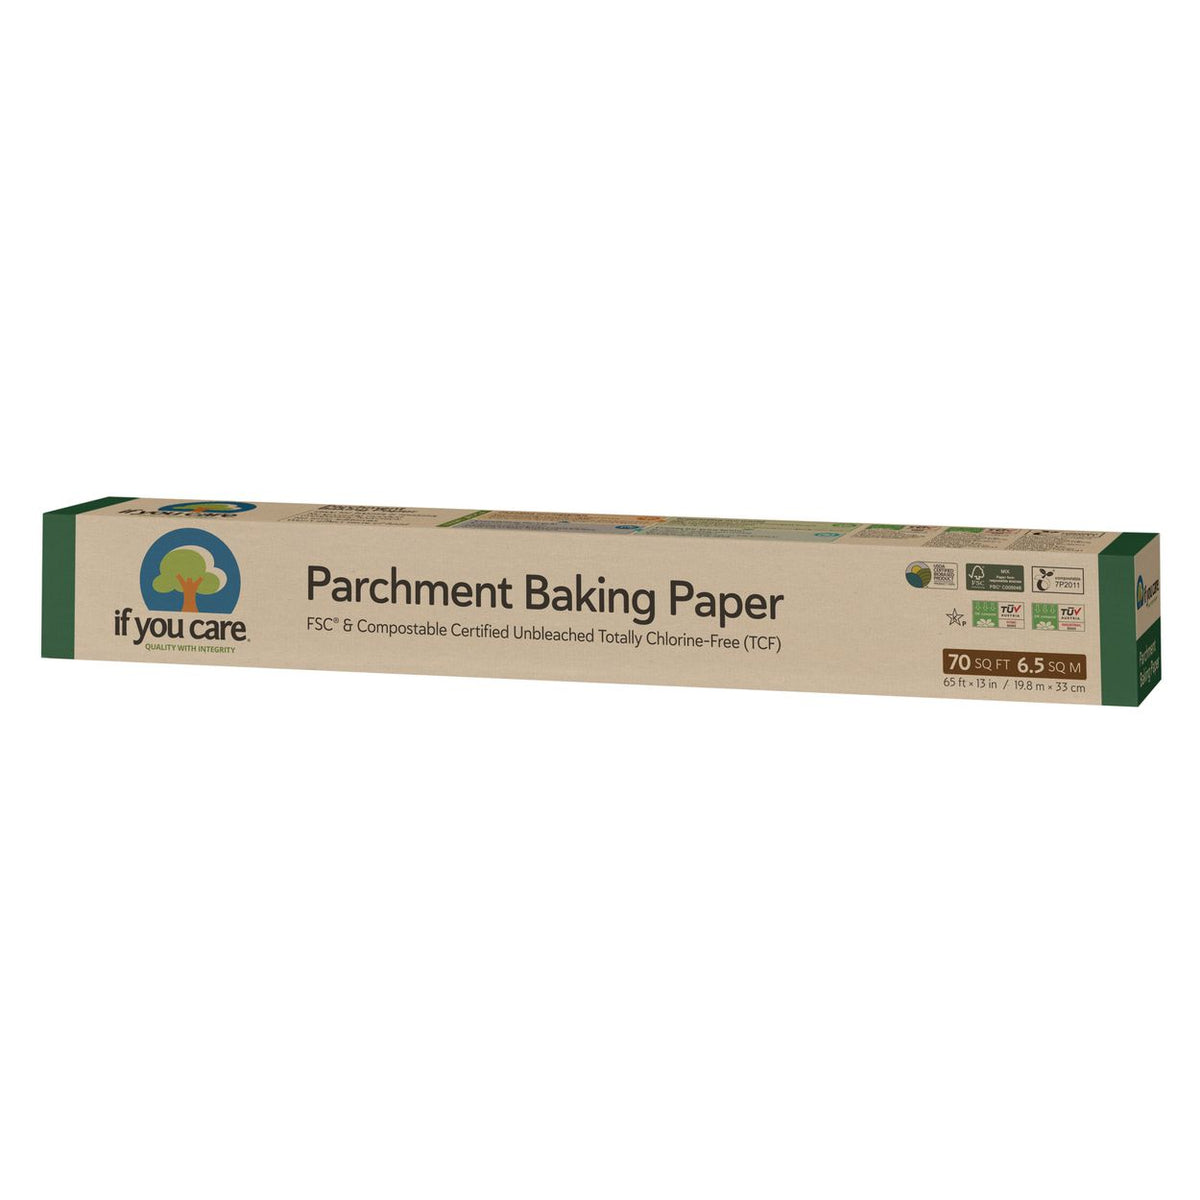 If You Care Unbleached Chlorine-Free Parchment Baking Paper 70 sq